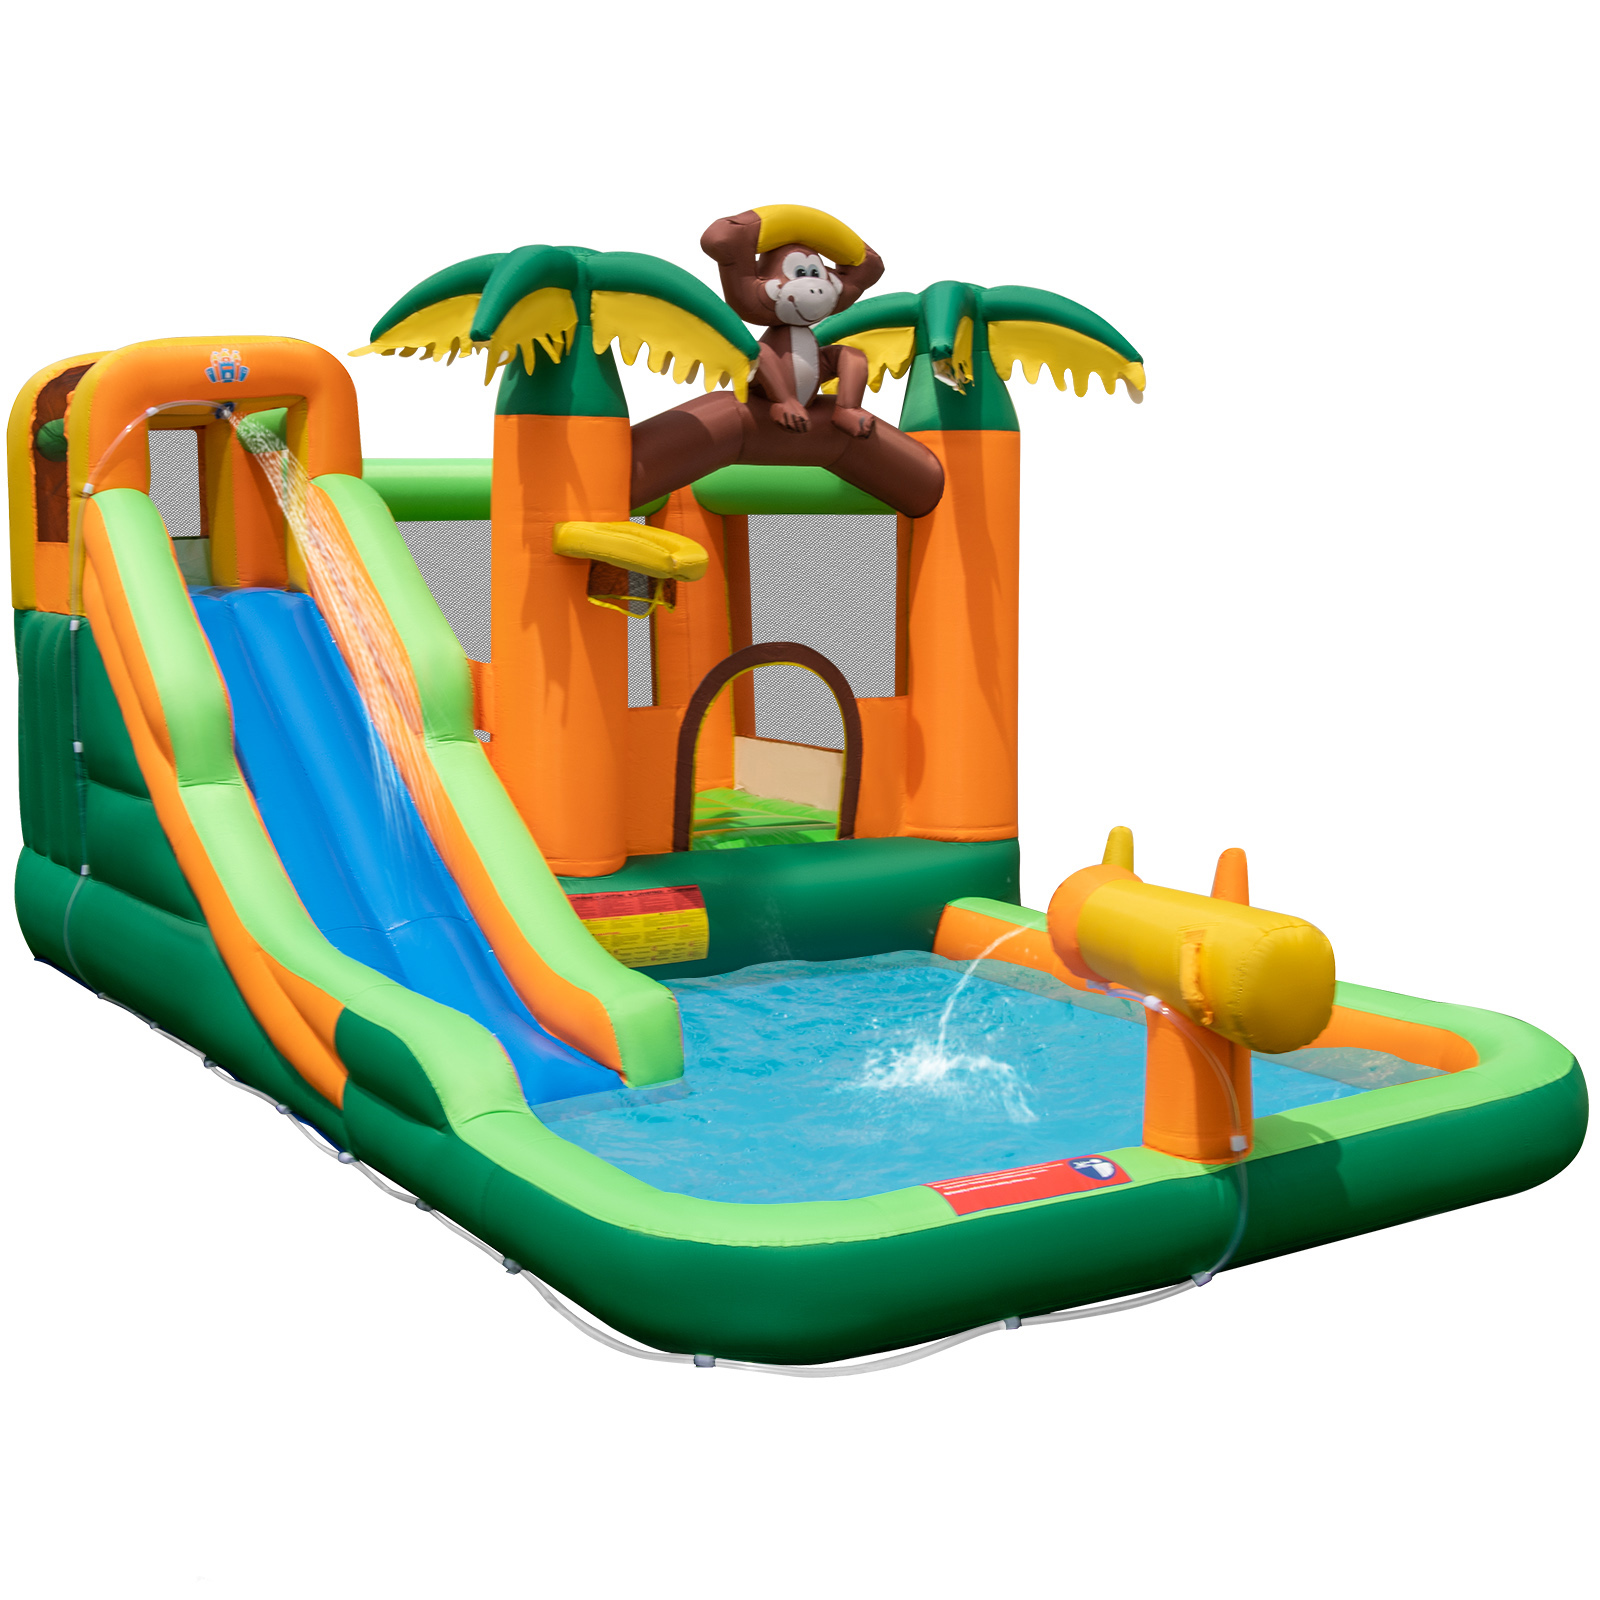 6-in-1 Monkey Themed Inflatable Water Slide Park with Slide and Splash Pool without Blower